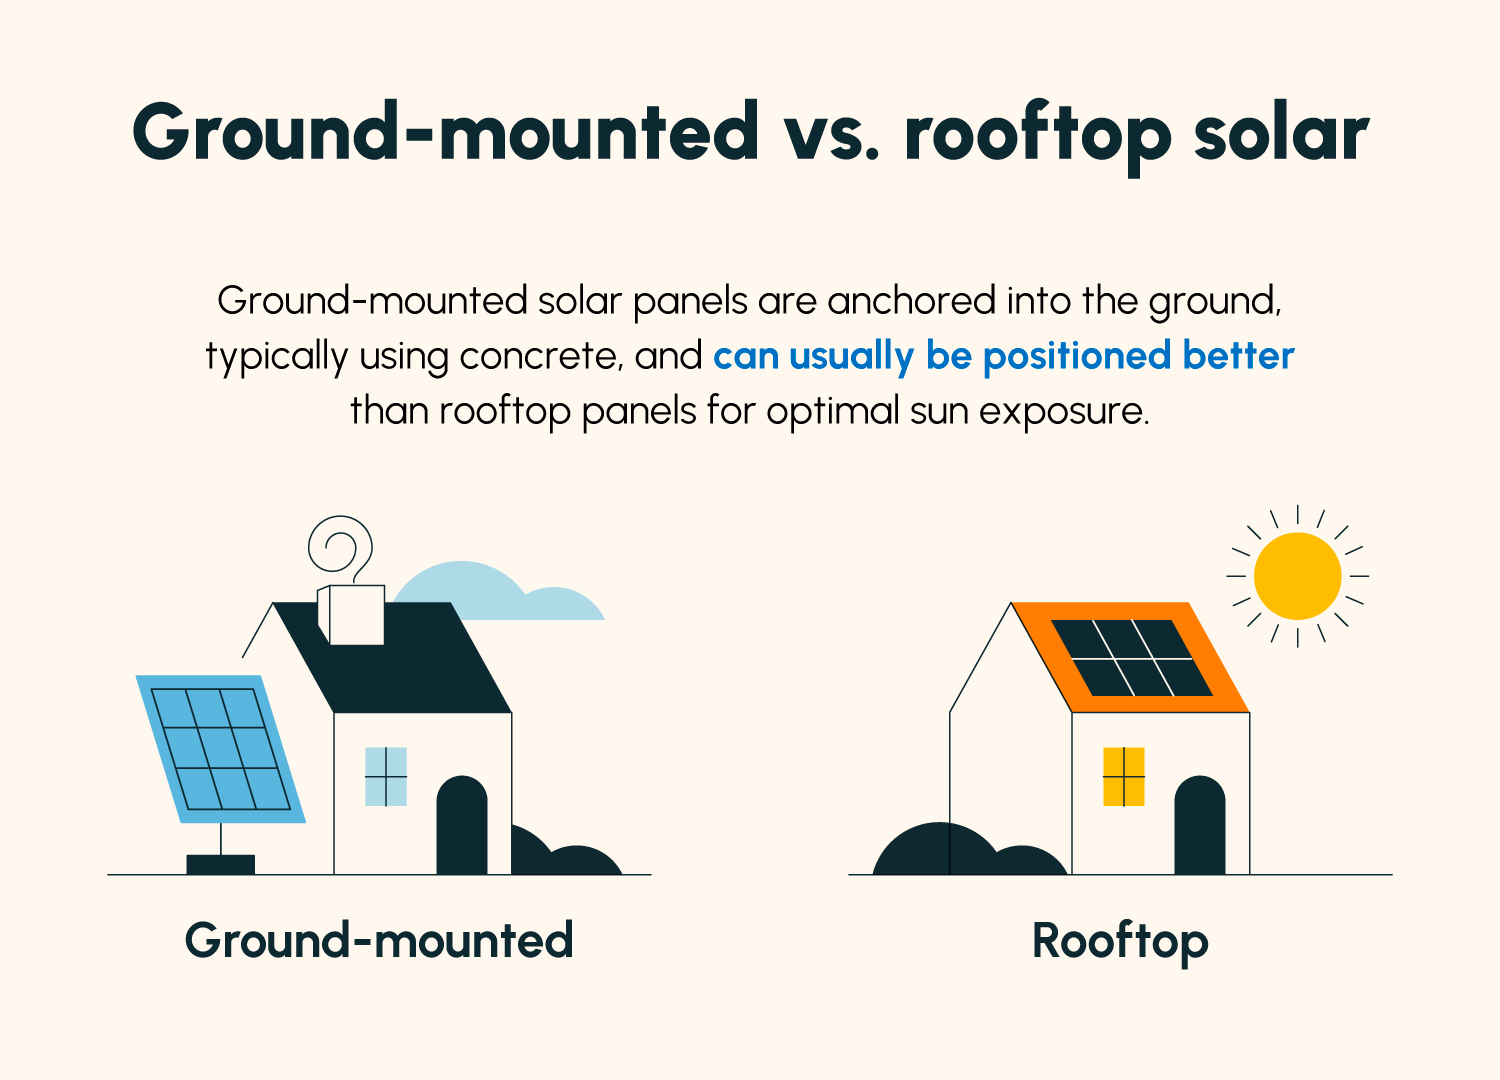 A comparison of ground-mounted and rooftop solar panels